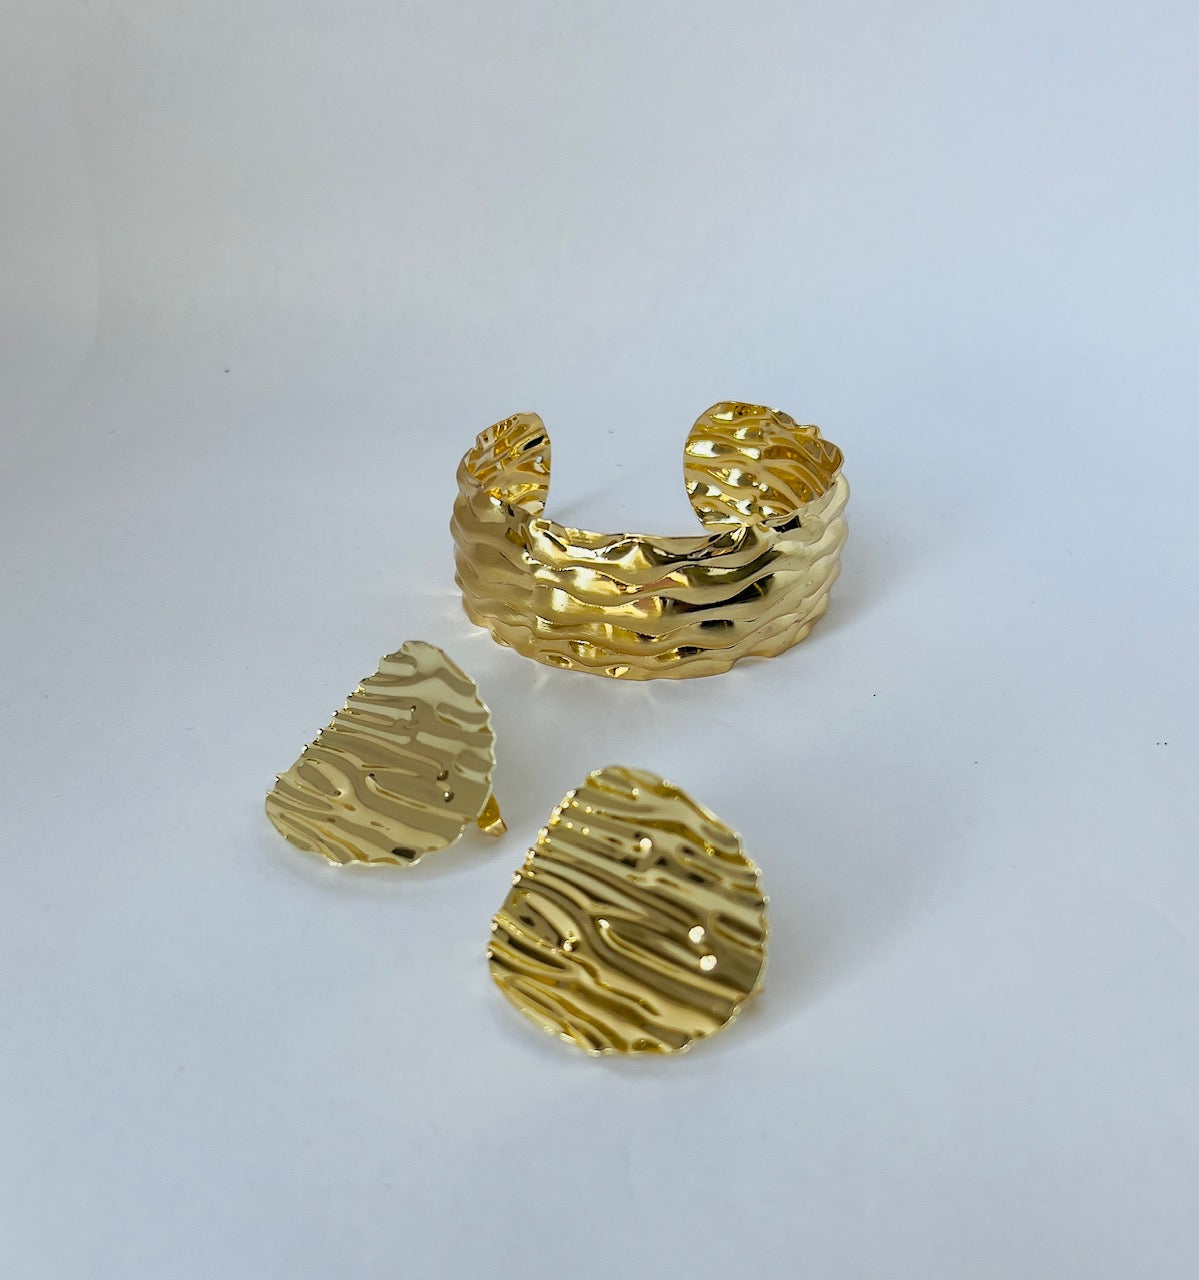 Elevate your style: Large gold plated earrings set with a chic corrugated texture. Perfect for women who love bold accessories.